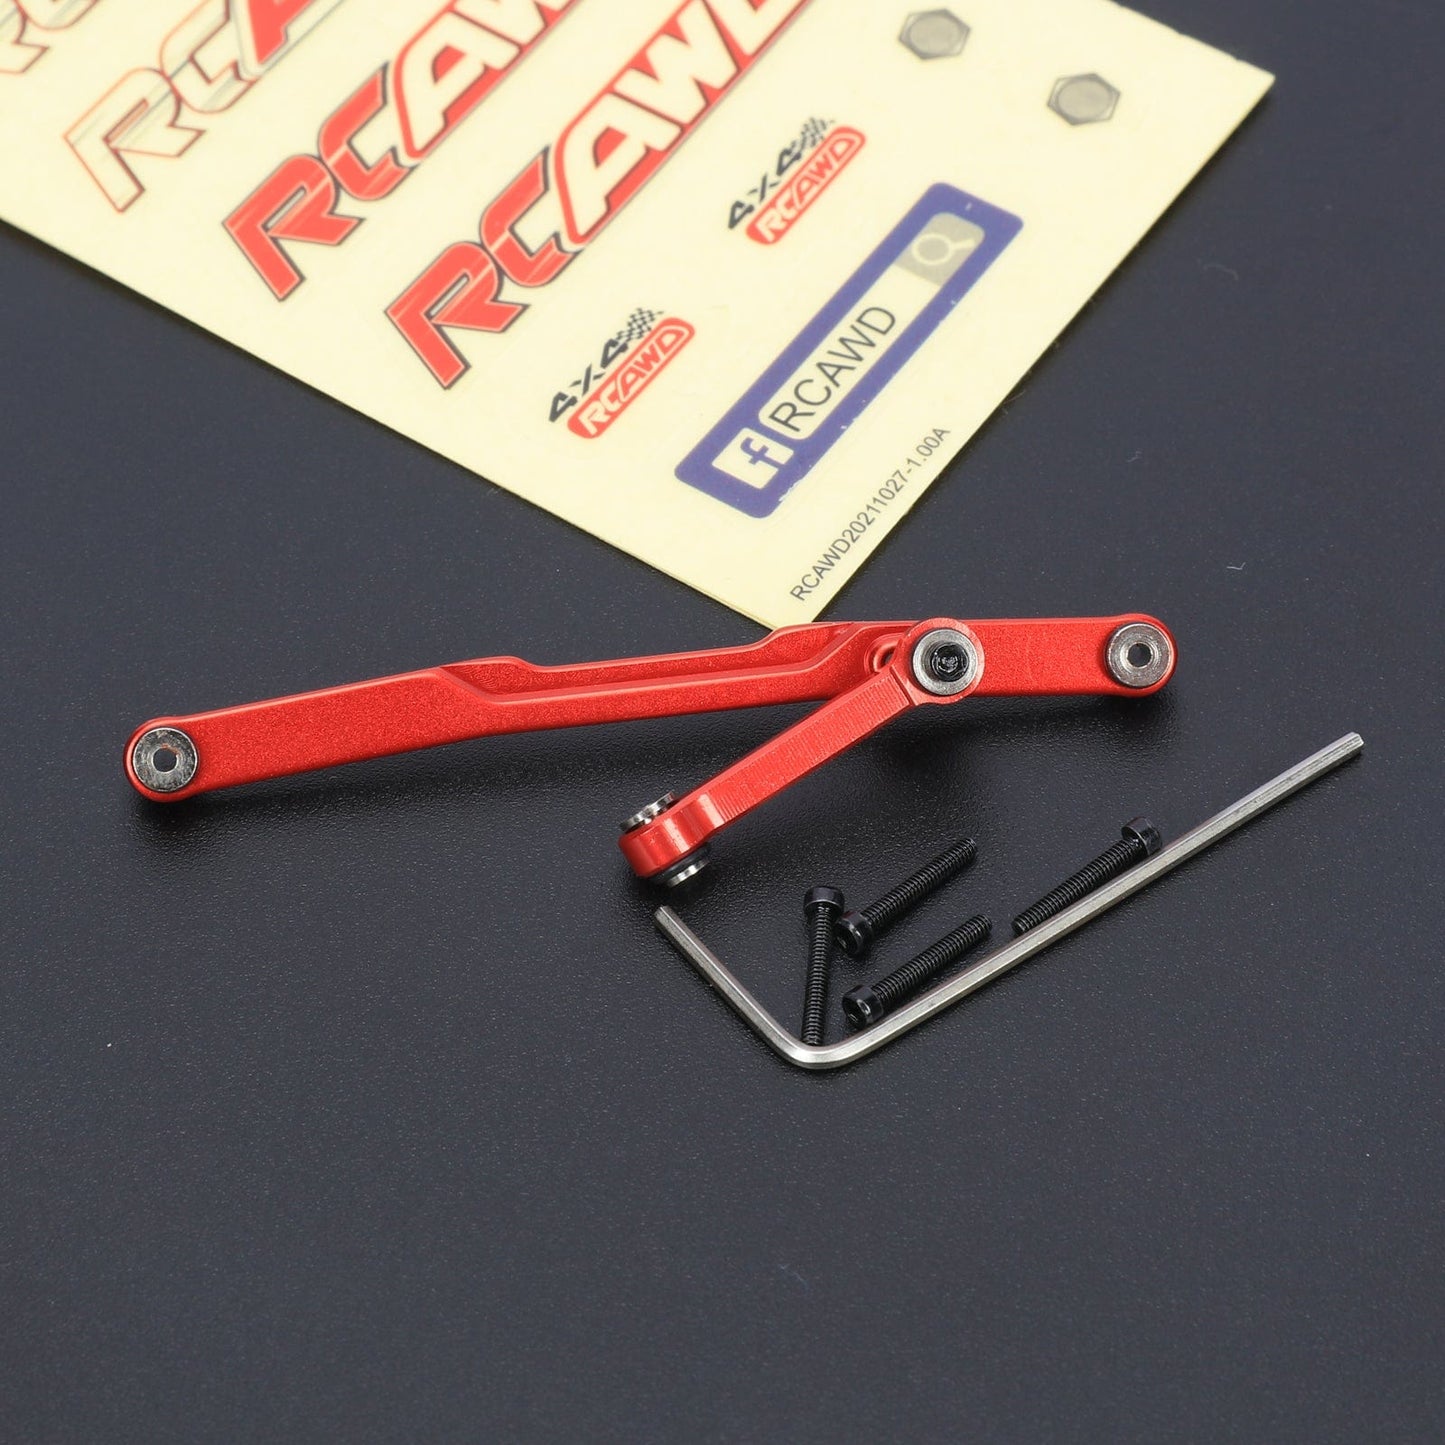 RCAWD AXIAL SCX24 Red RCAWD Axial SCX24 Fix Link Steering Rod front steering saver complete HRASXTF49X01 upgrade parts